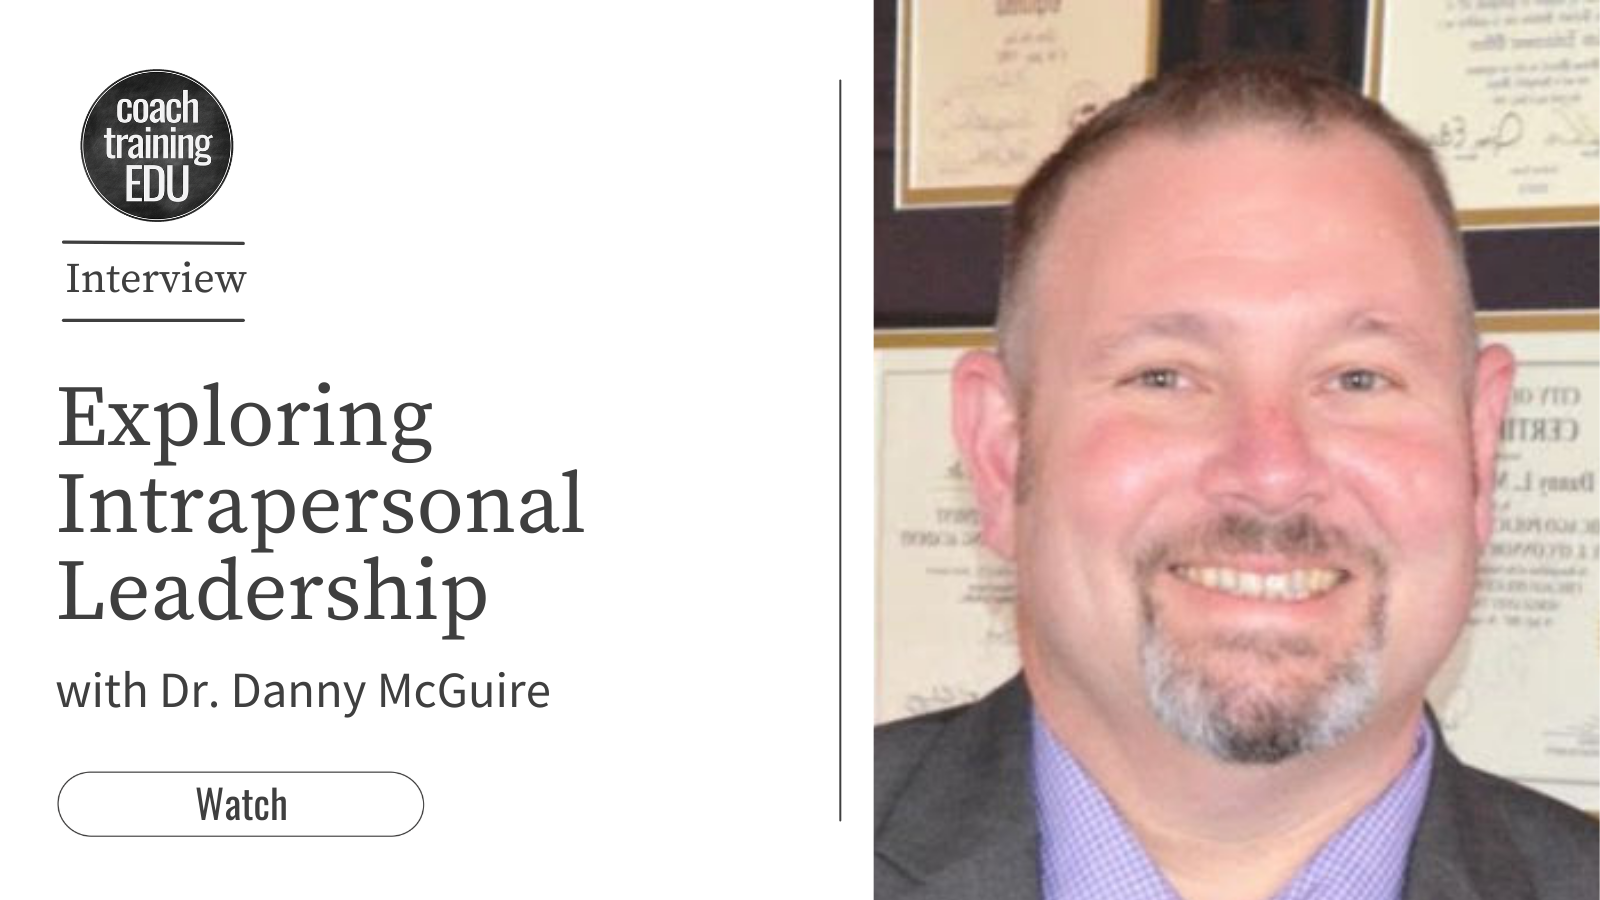 Exploring Intrapersonal Leadership with Dr. Danny McGuire Video